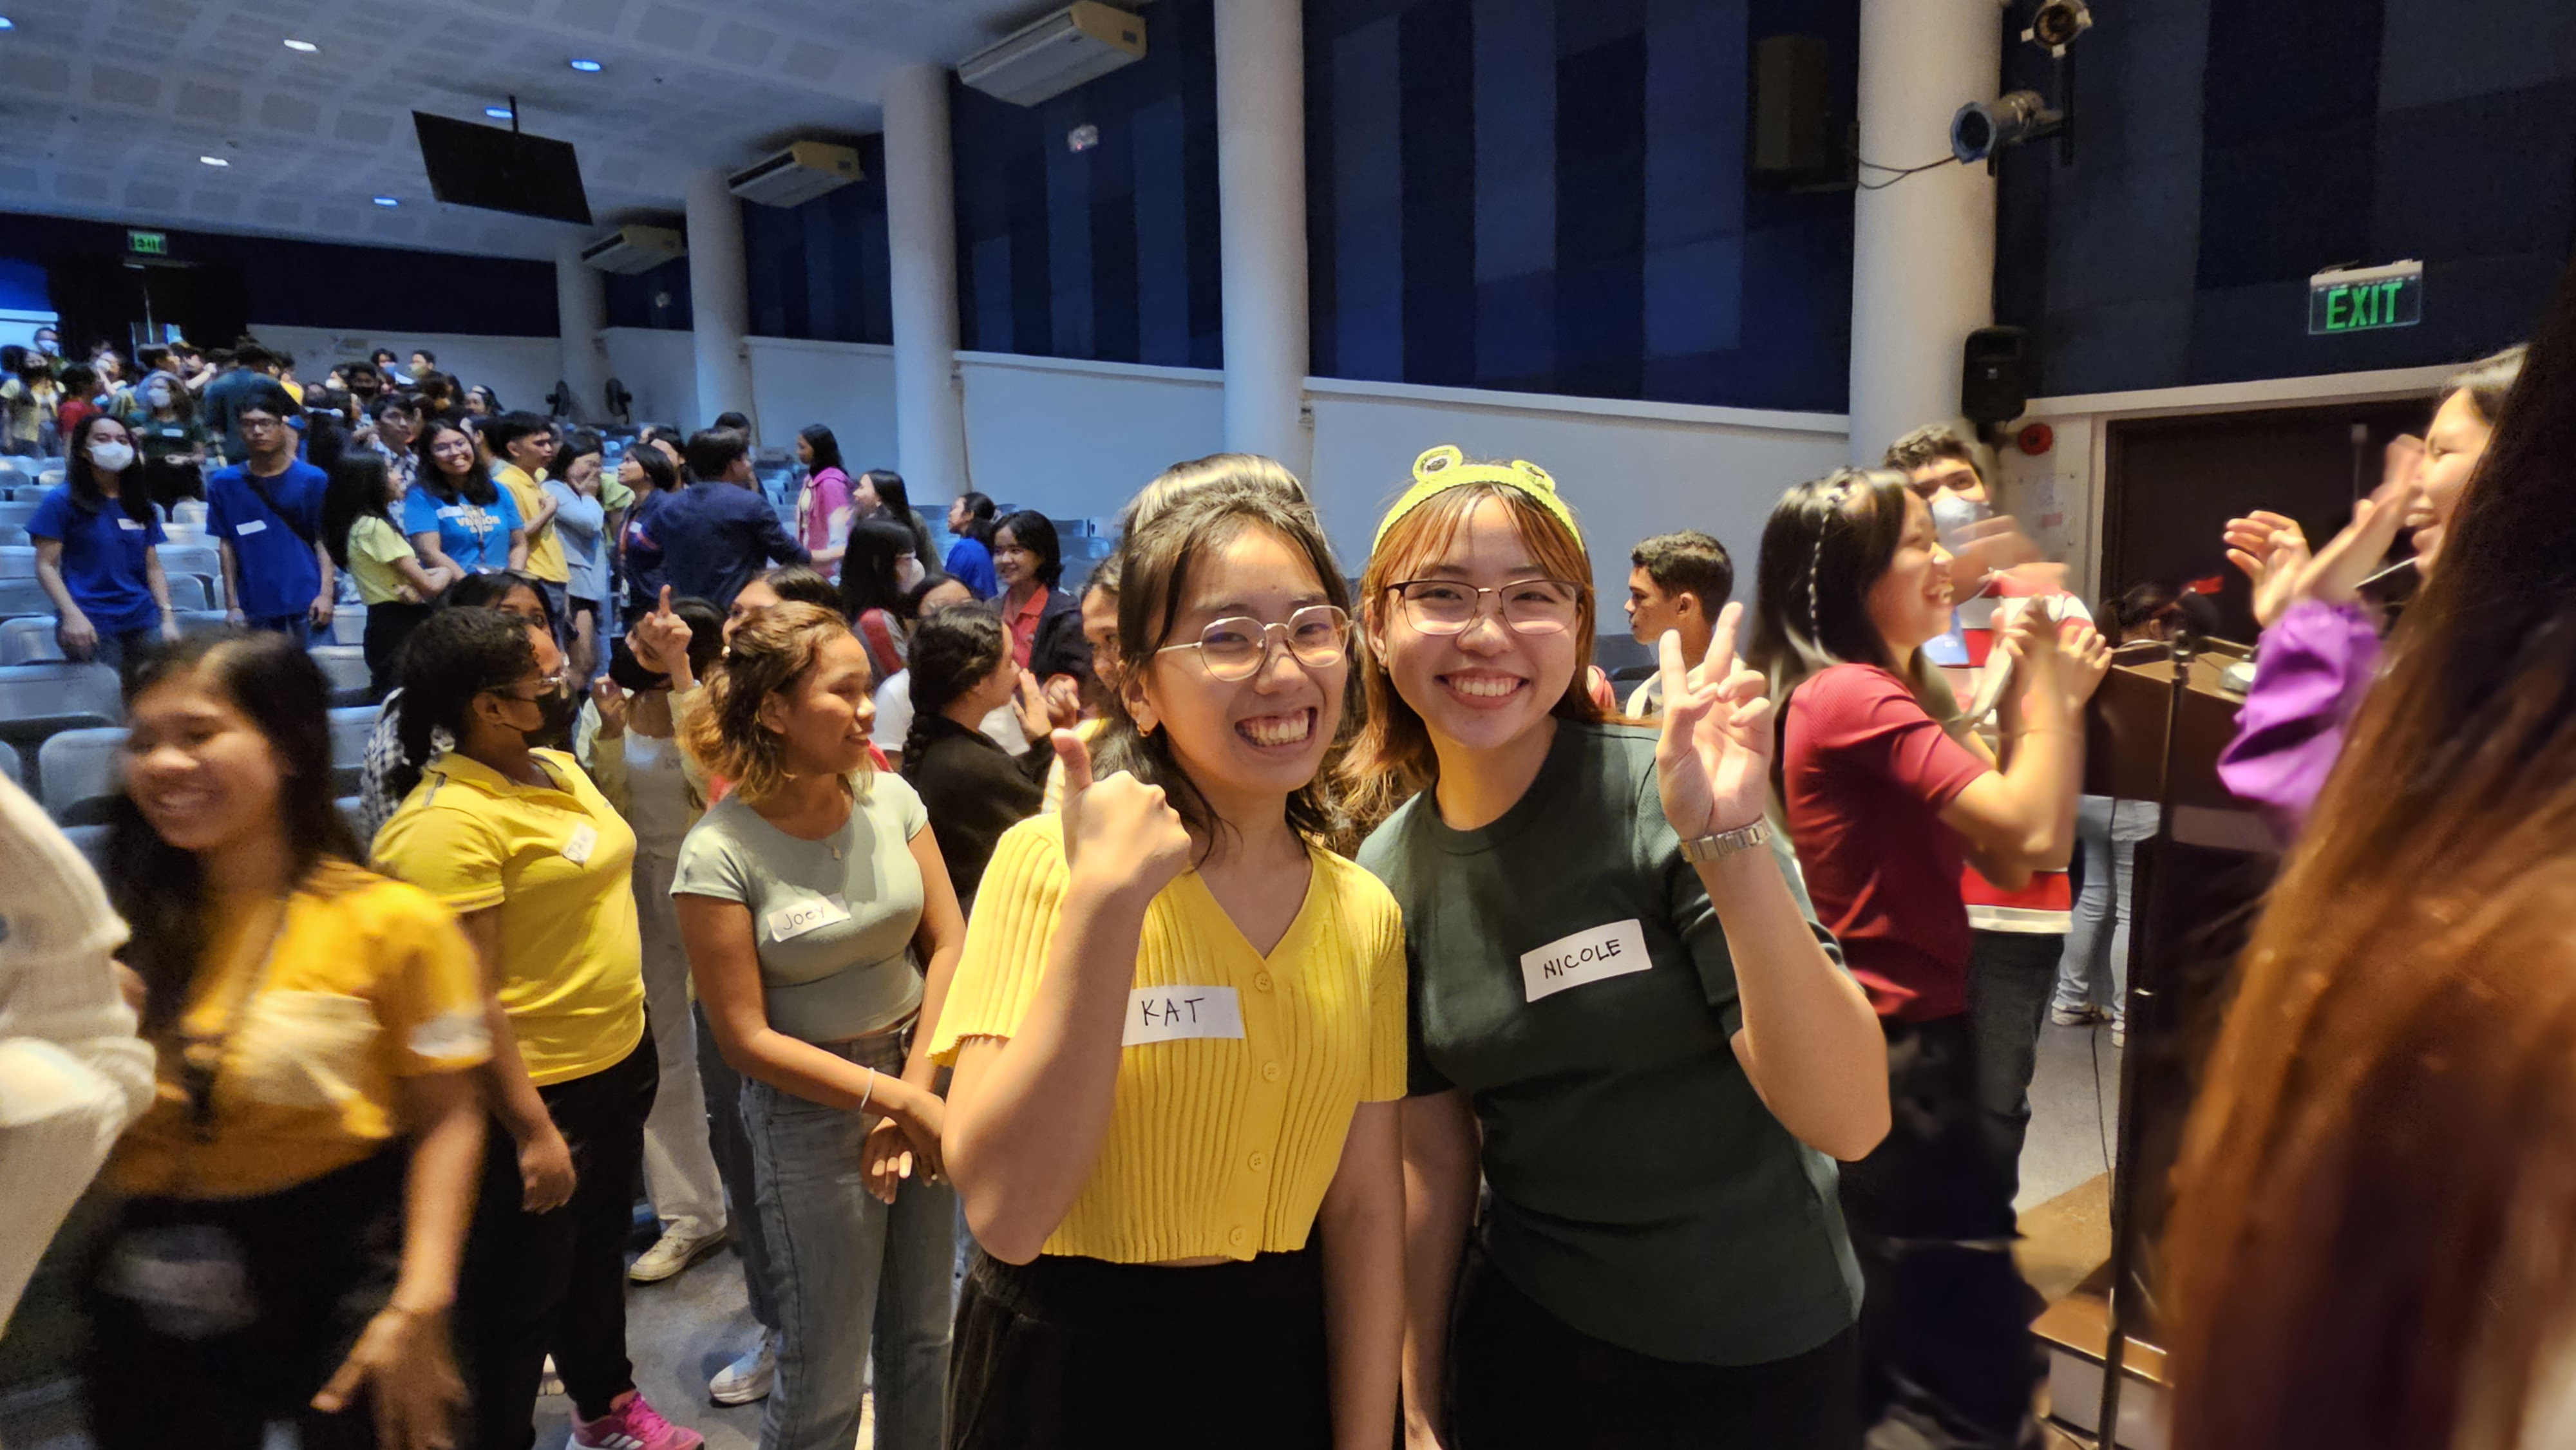 In the foreground, two students smile at the camera. On the left is one in yellow with her thumb up, on the right is one in green showing a peace sign.